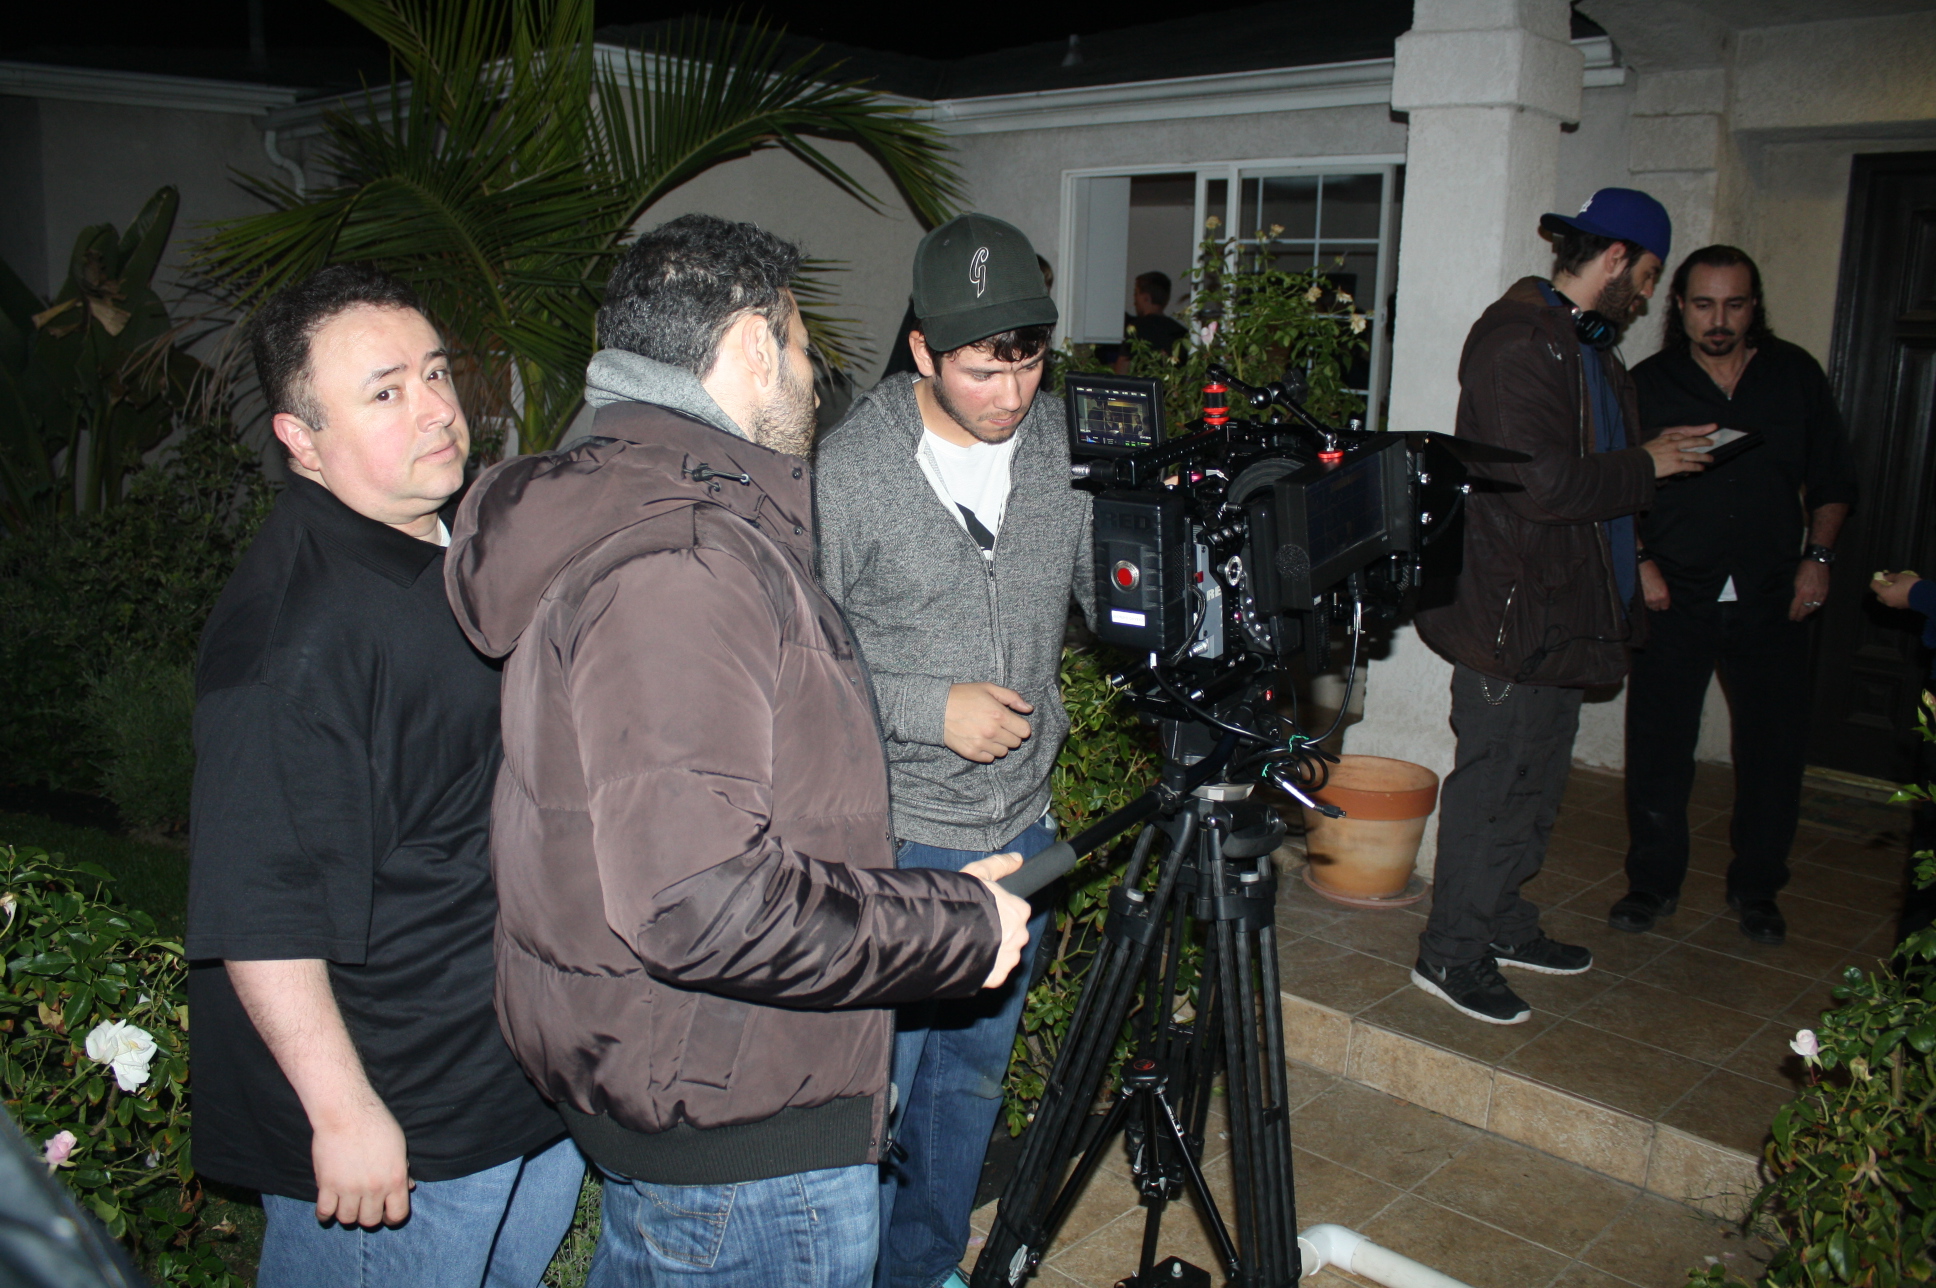 Sam Osman (far right) getting Scene Instructions from Director Jared Cohn on the Set of 